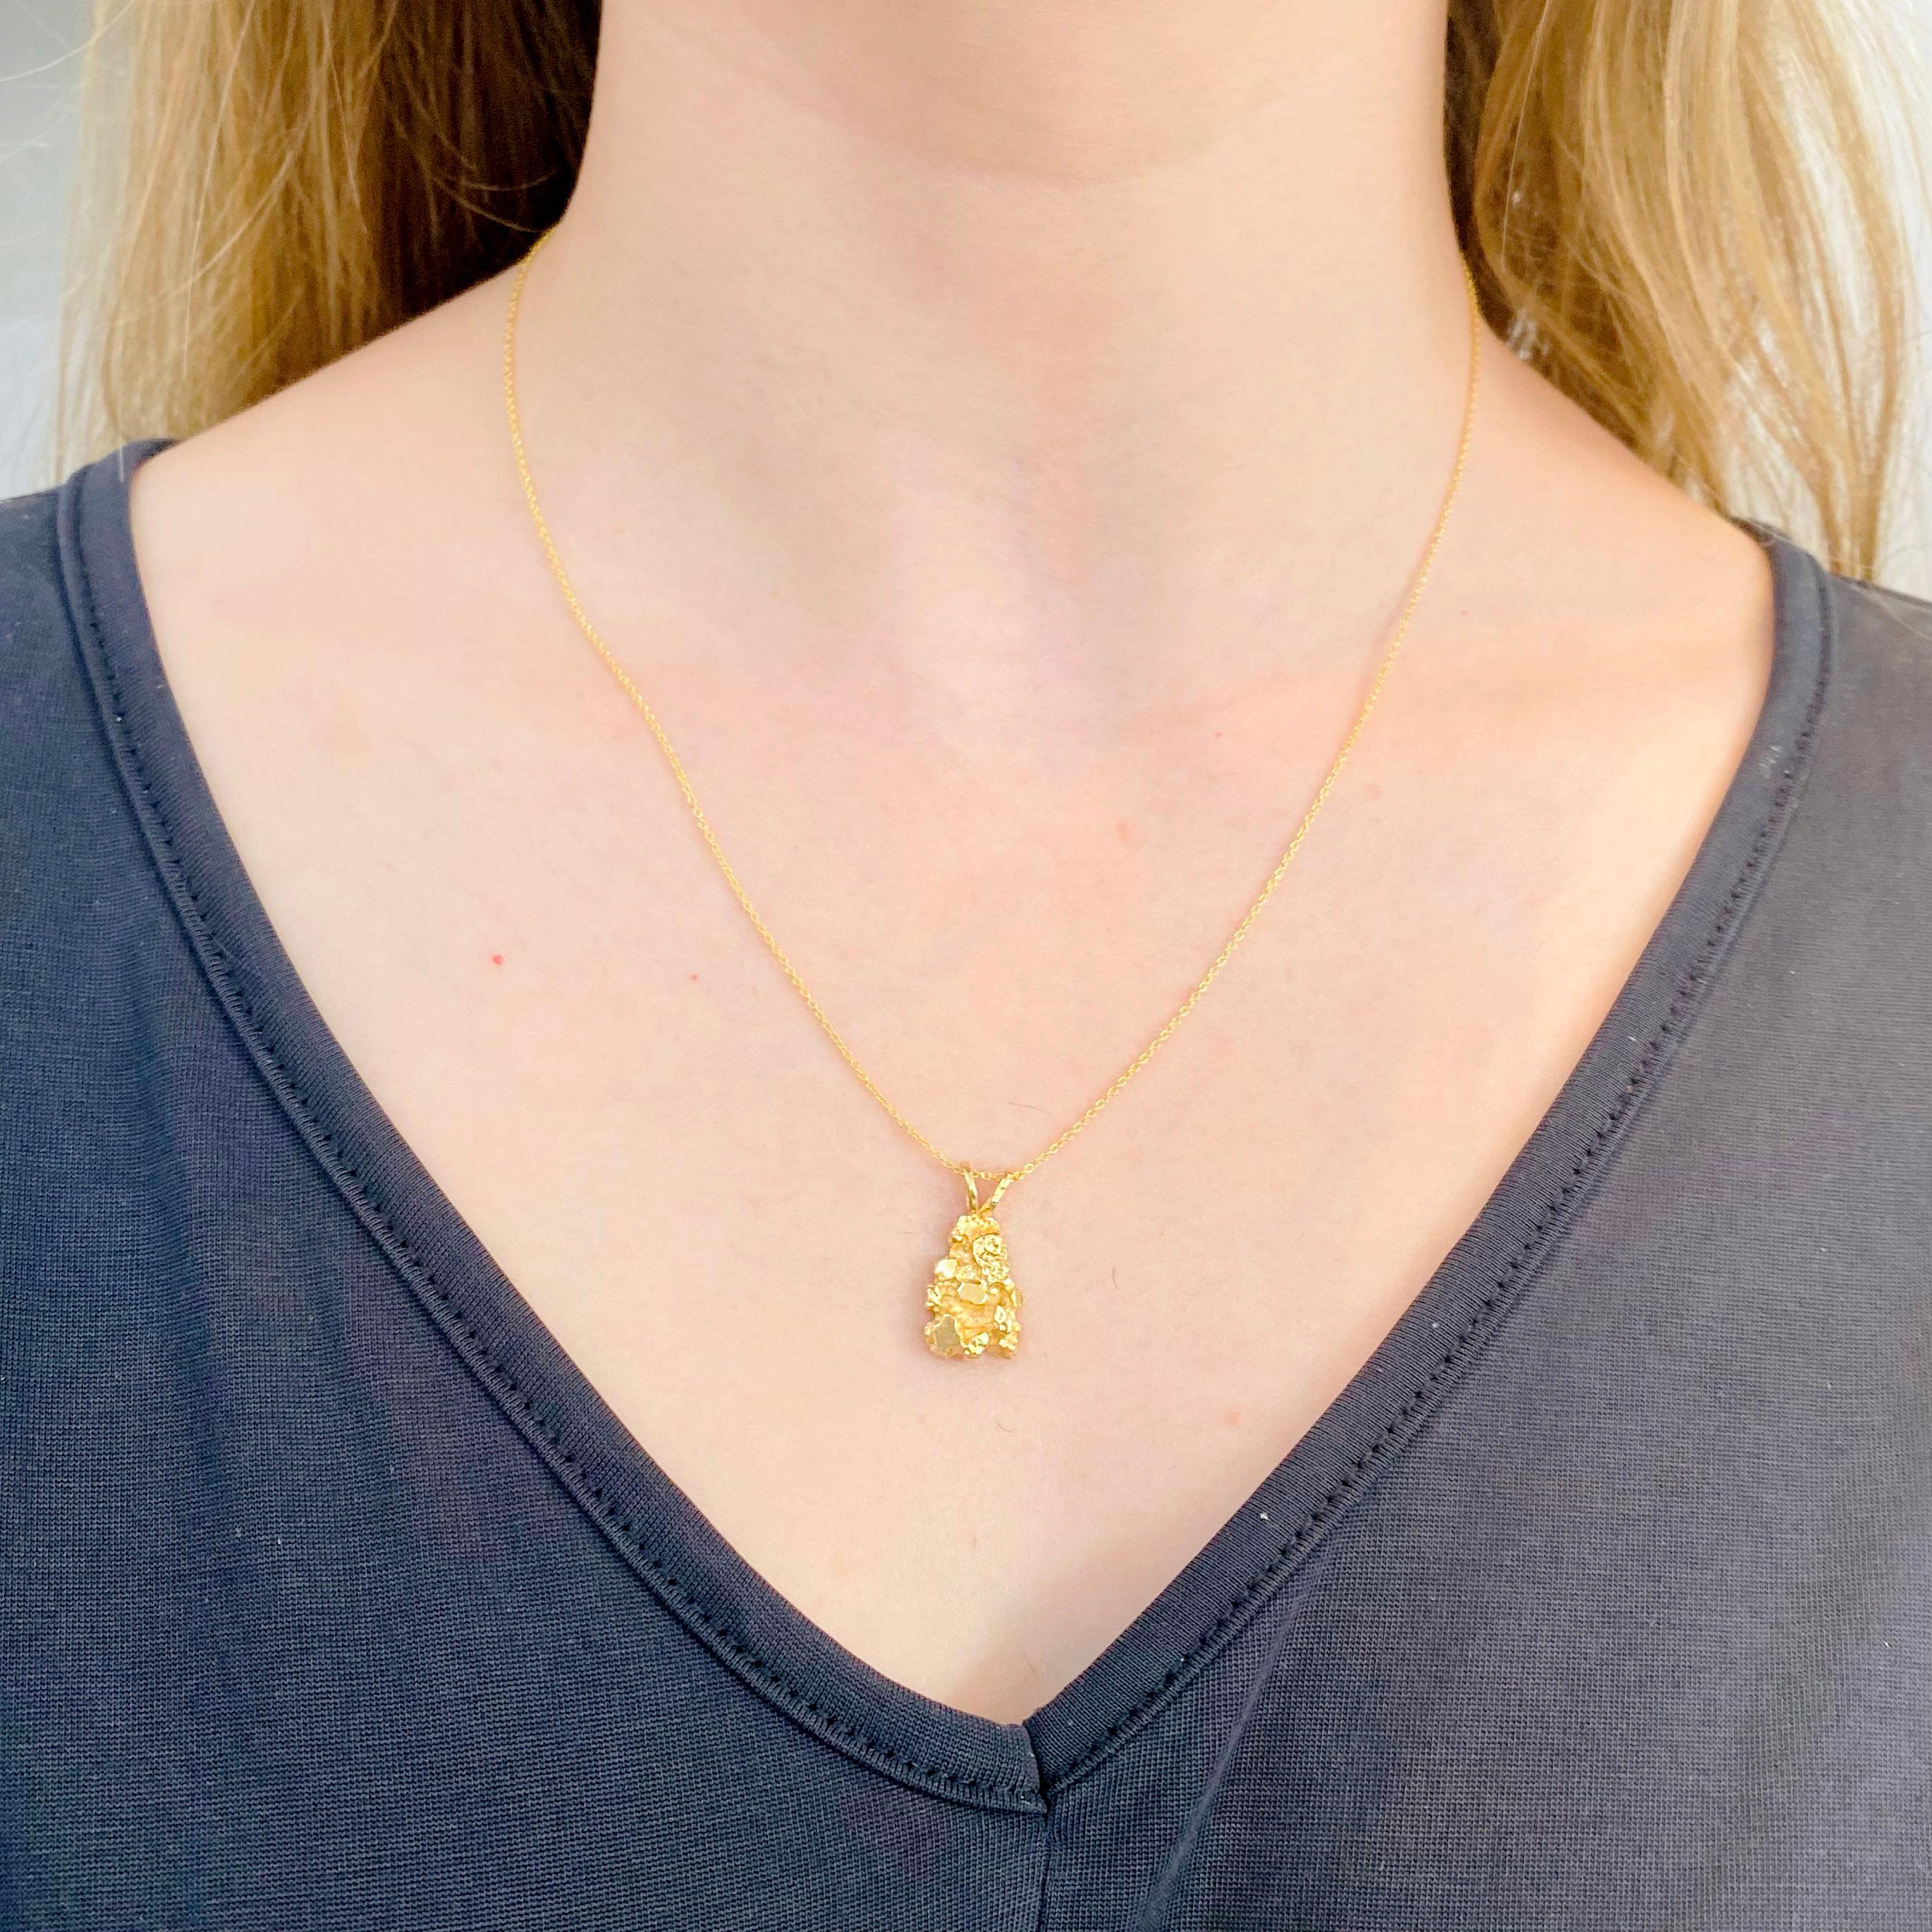 Mary Rupert has been designing jewelry since 1978 and this nugget pendant is one of her original designs from 1979. She has brought this design back and it is more popular than ever! The special processing of the 14 karat yellow gold gives it this